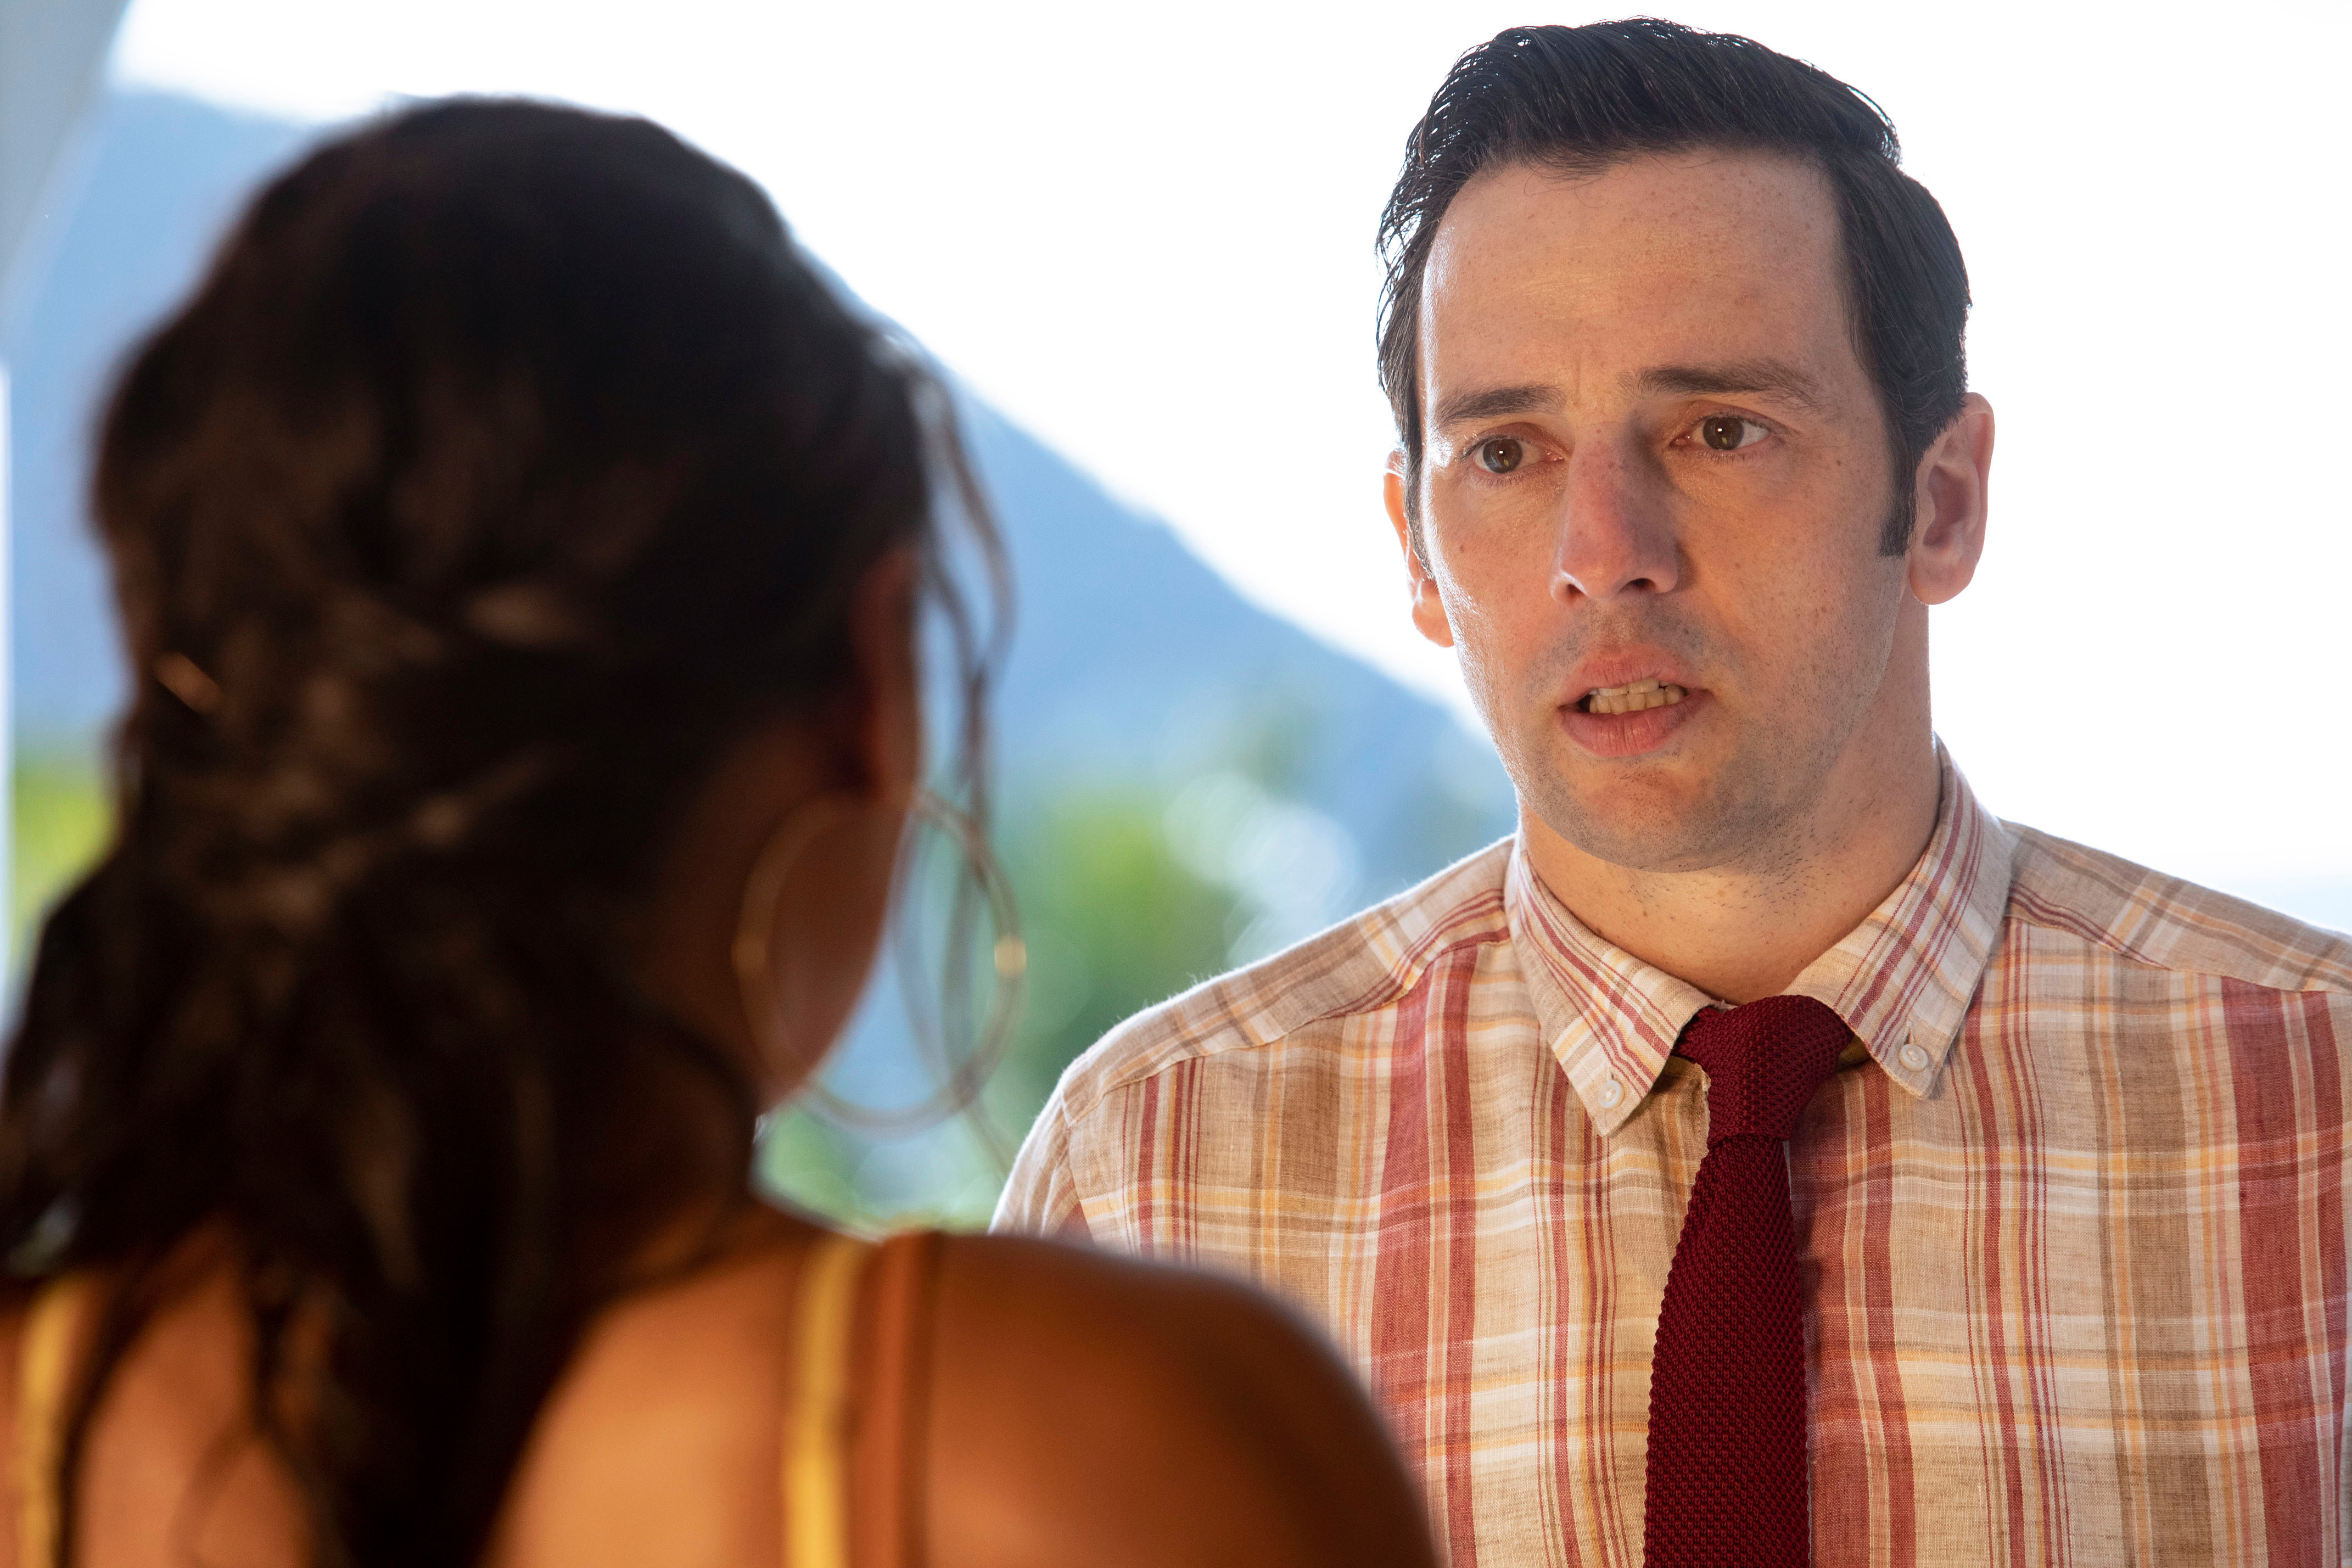 Death in Paradise series 10 shocker: The ‘alternative version’ to that Neville and Florence cliff-hanger revealed